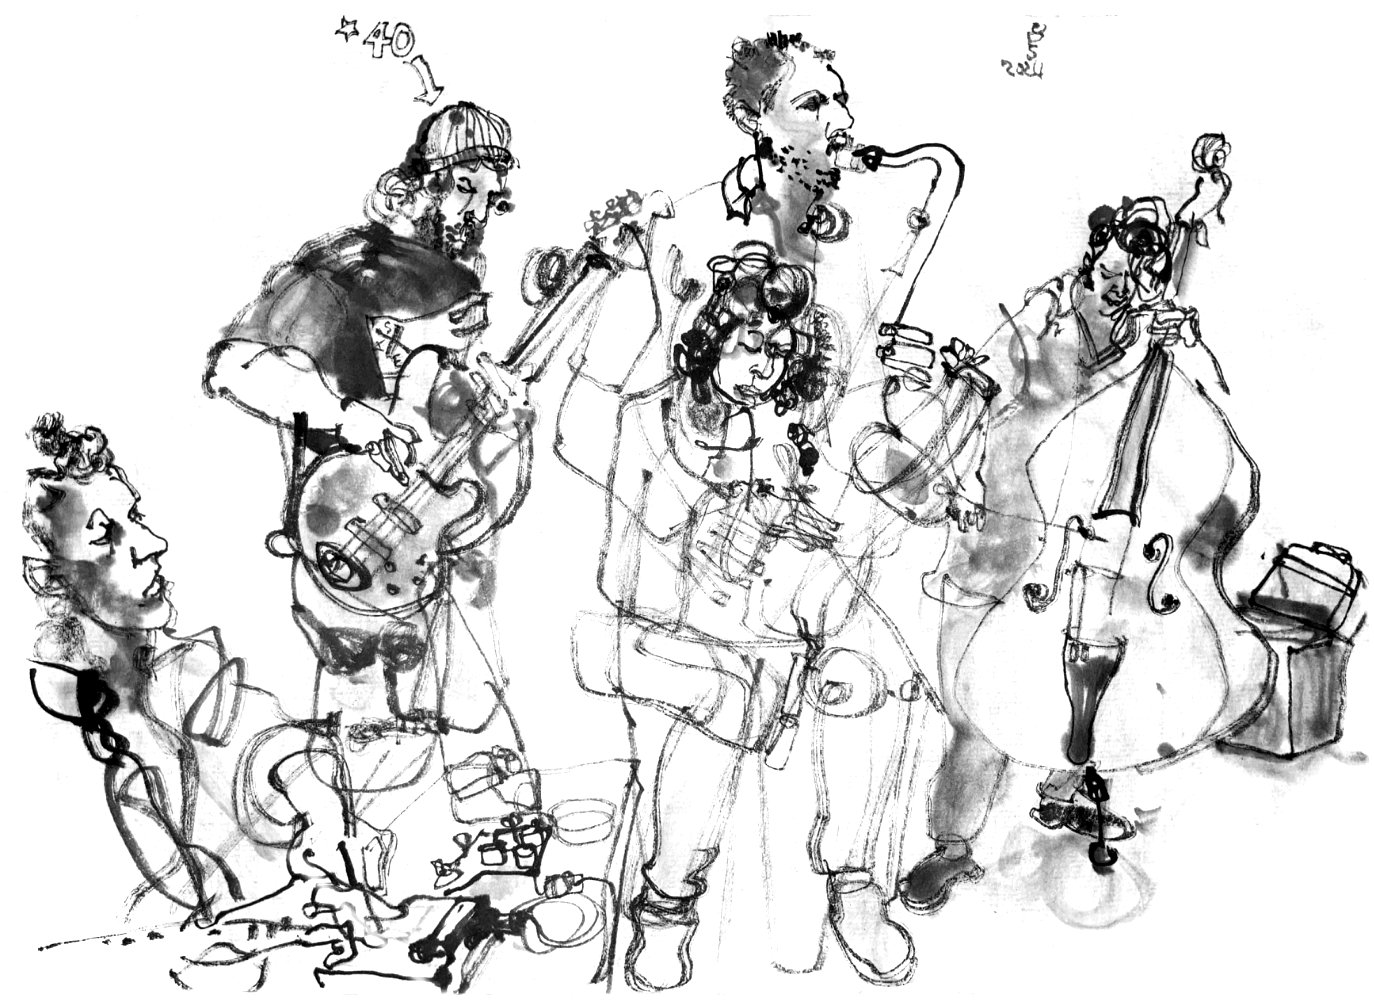 Ink drawing of five musicians.